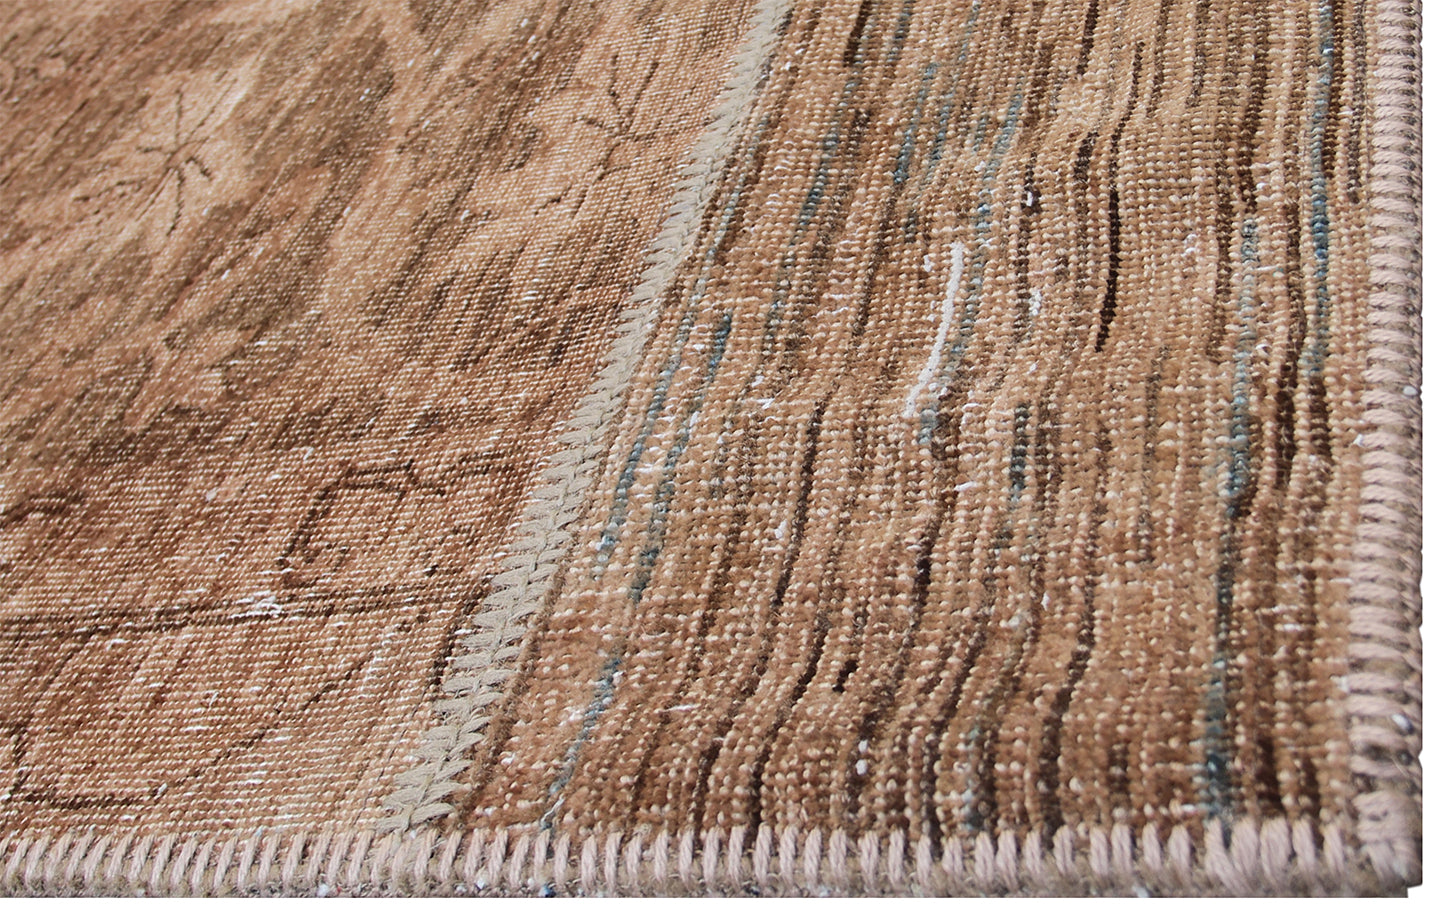 8'x10' Brown Ariana Patchwork Rug